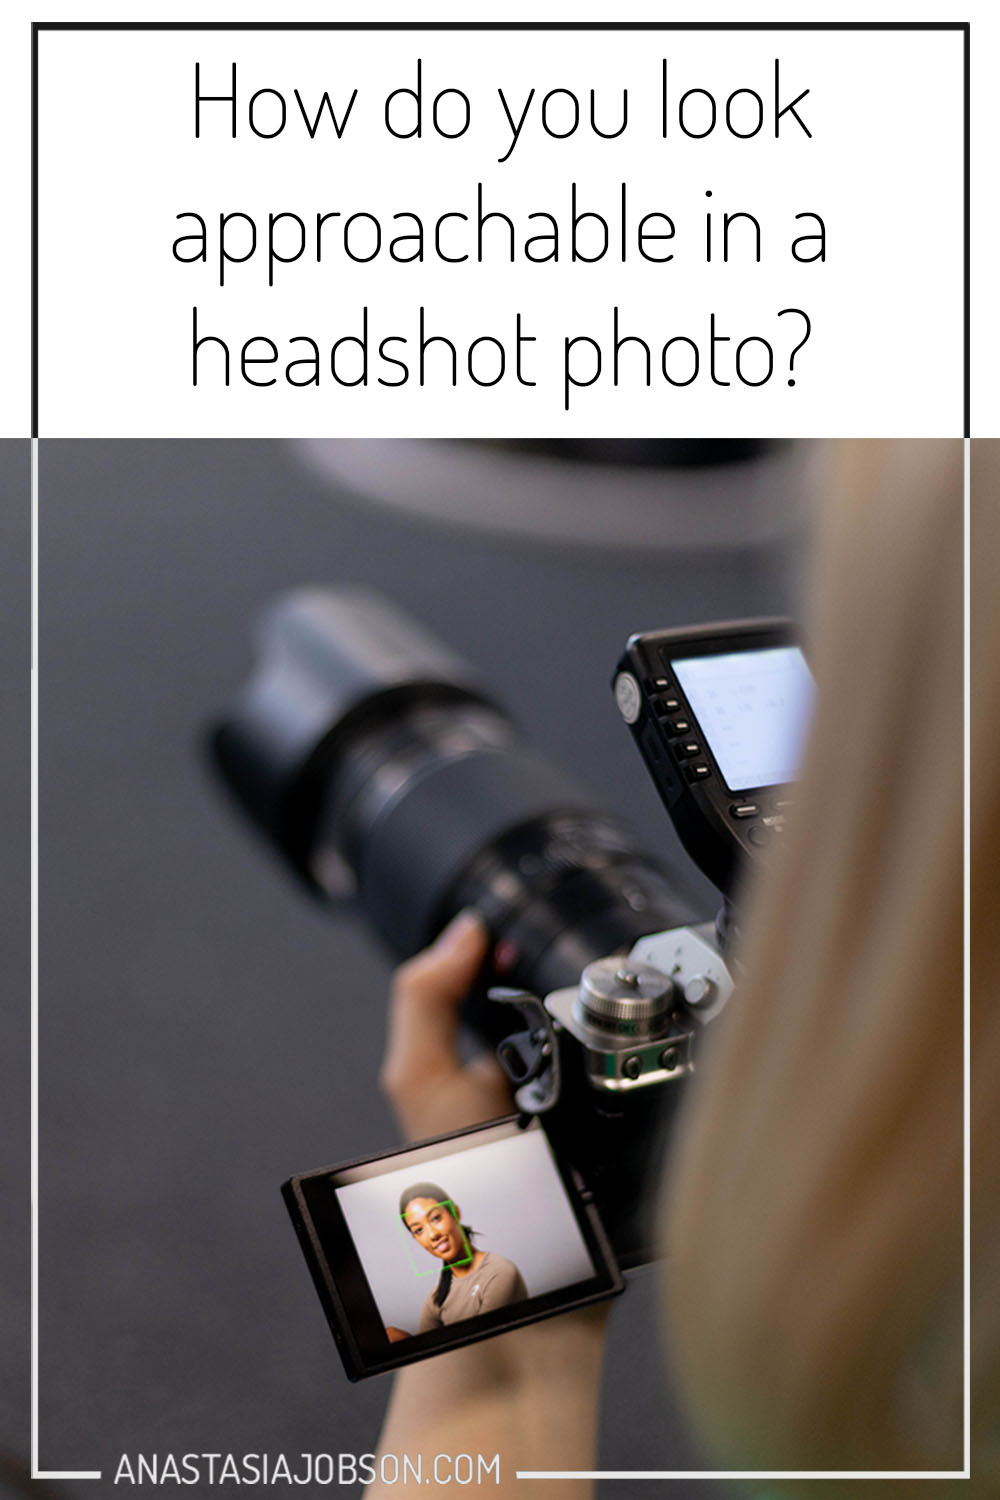 How do you look approachable in a headshot photo?